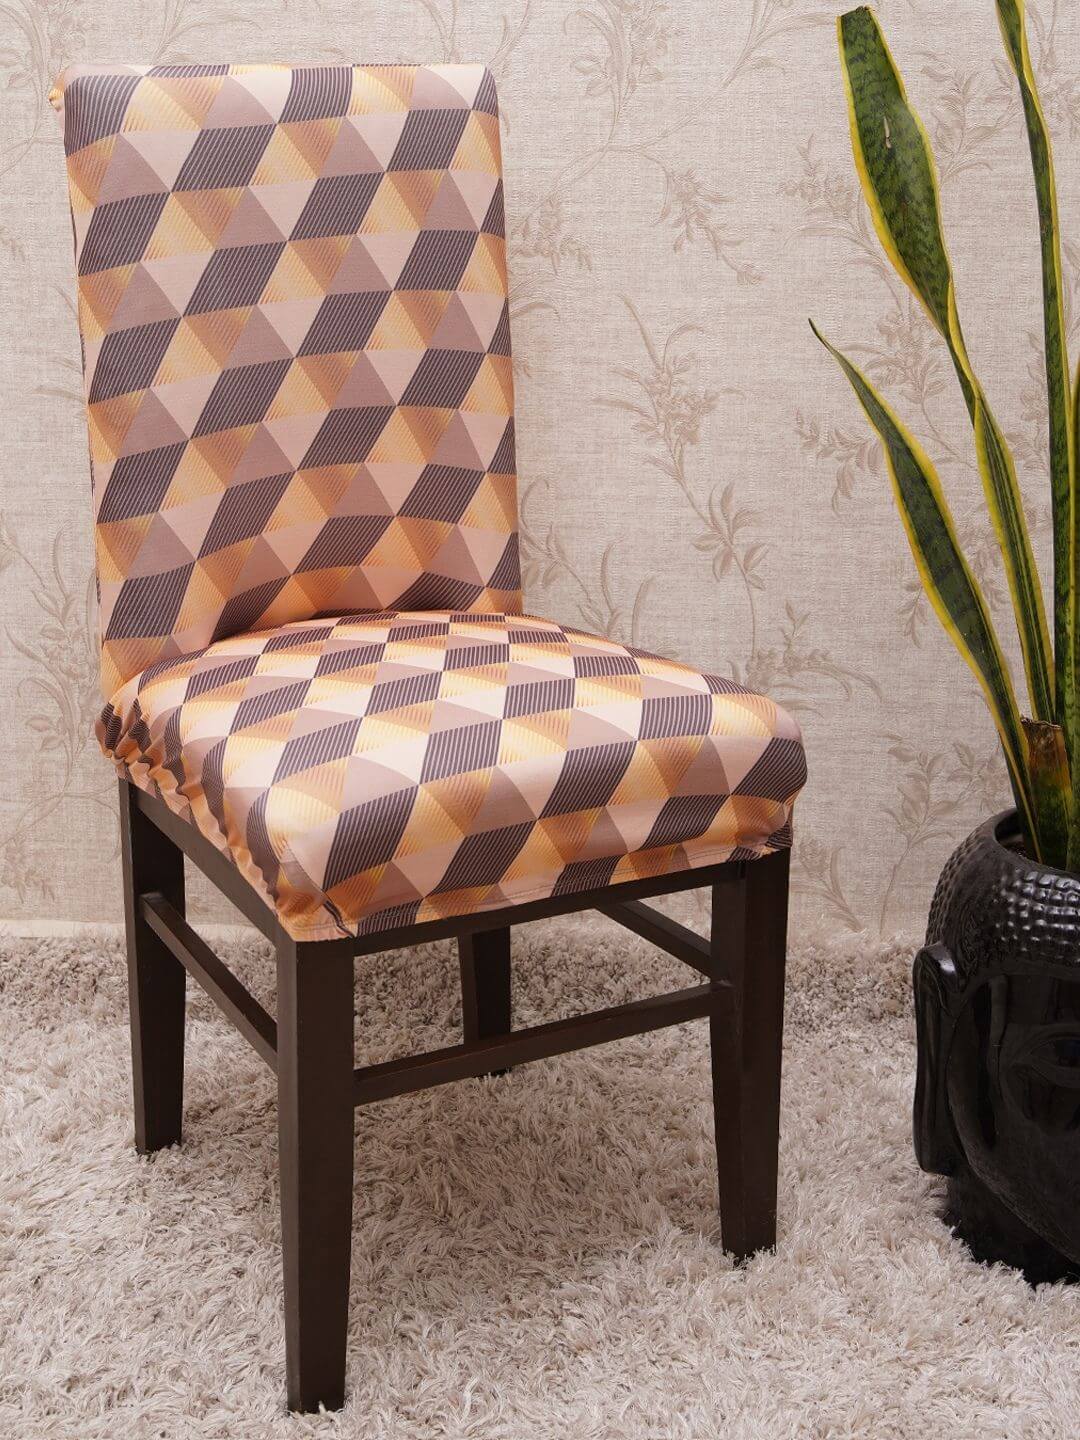 chairs covers set of 6, chair slipcovers for dining table, chair covers set of 6 in india,chair covers online, magic universal chair cove3D polygon striped..- divine trendz exclusive paisely pattern.